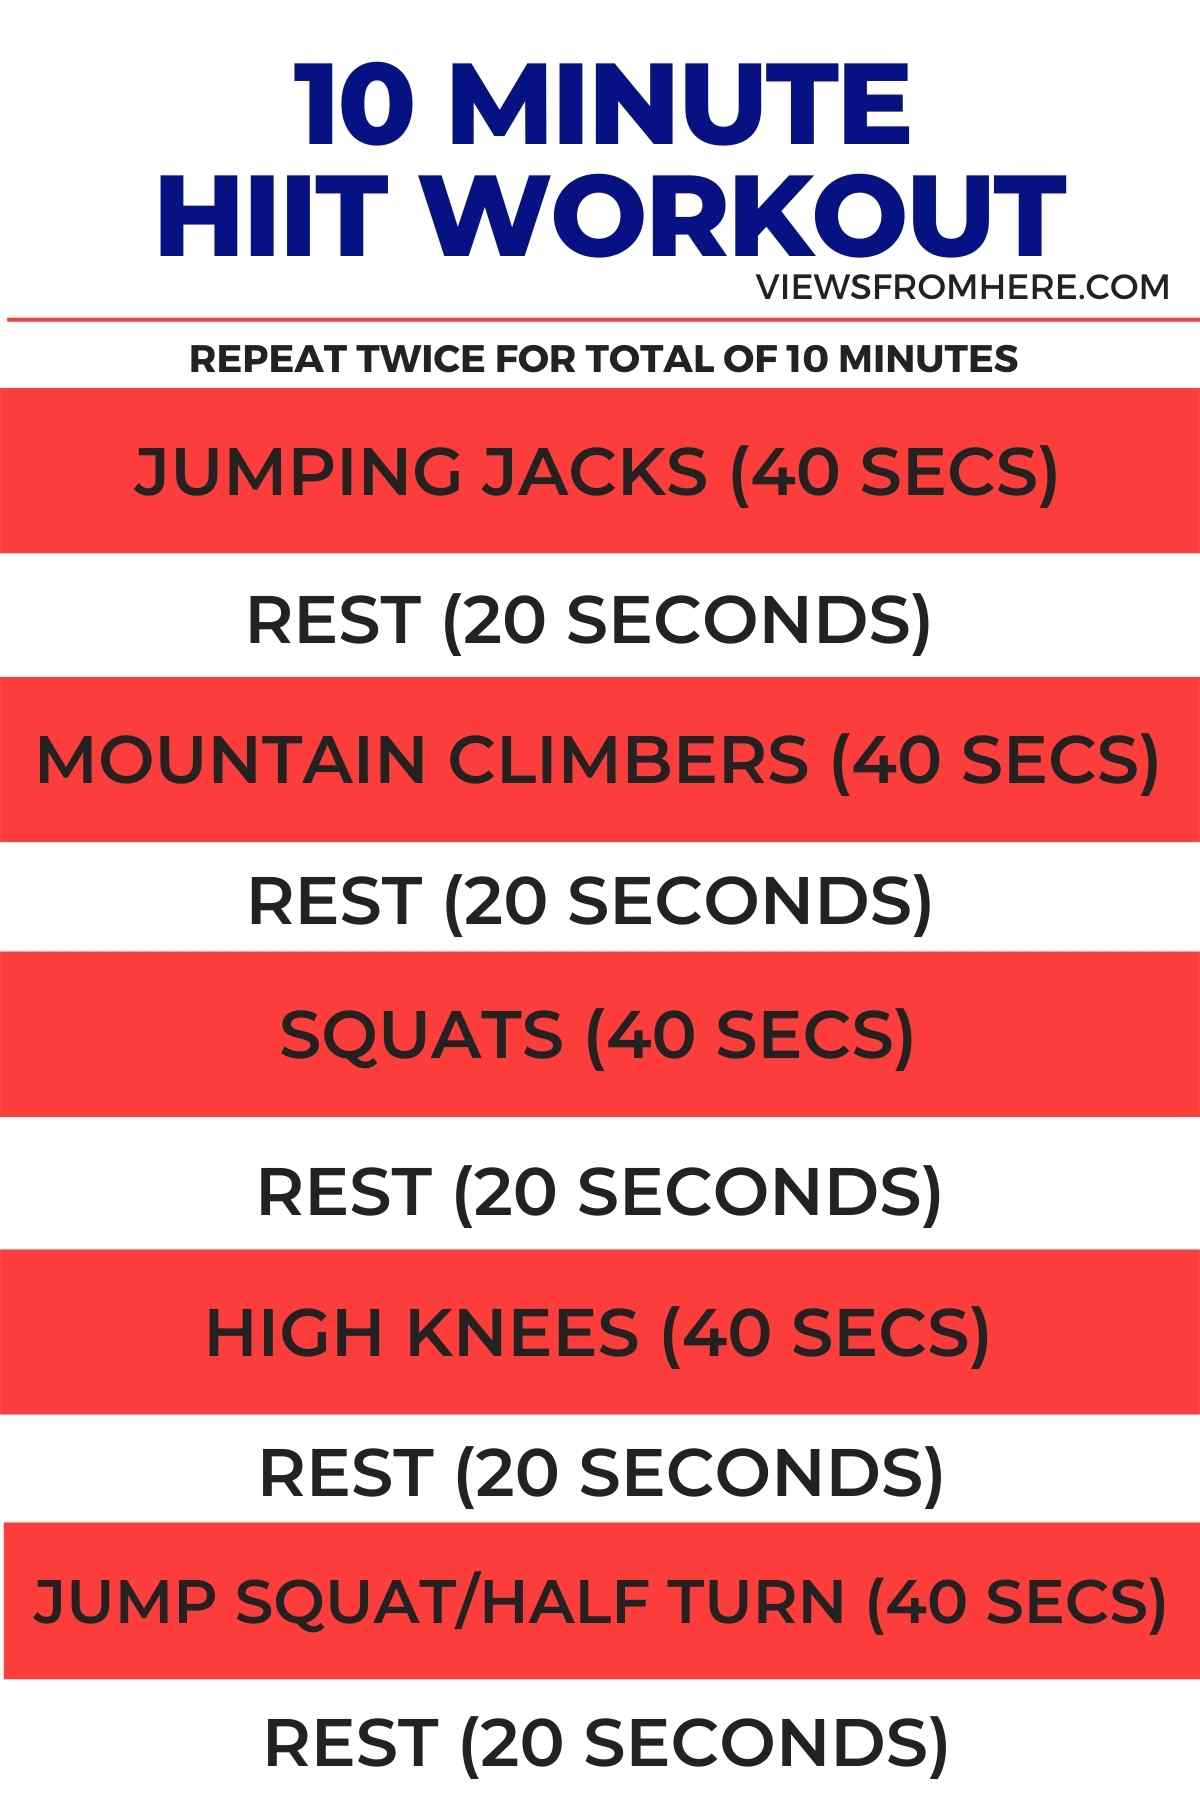 10 minute hiit workout for beginners pin